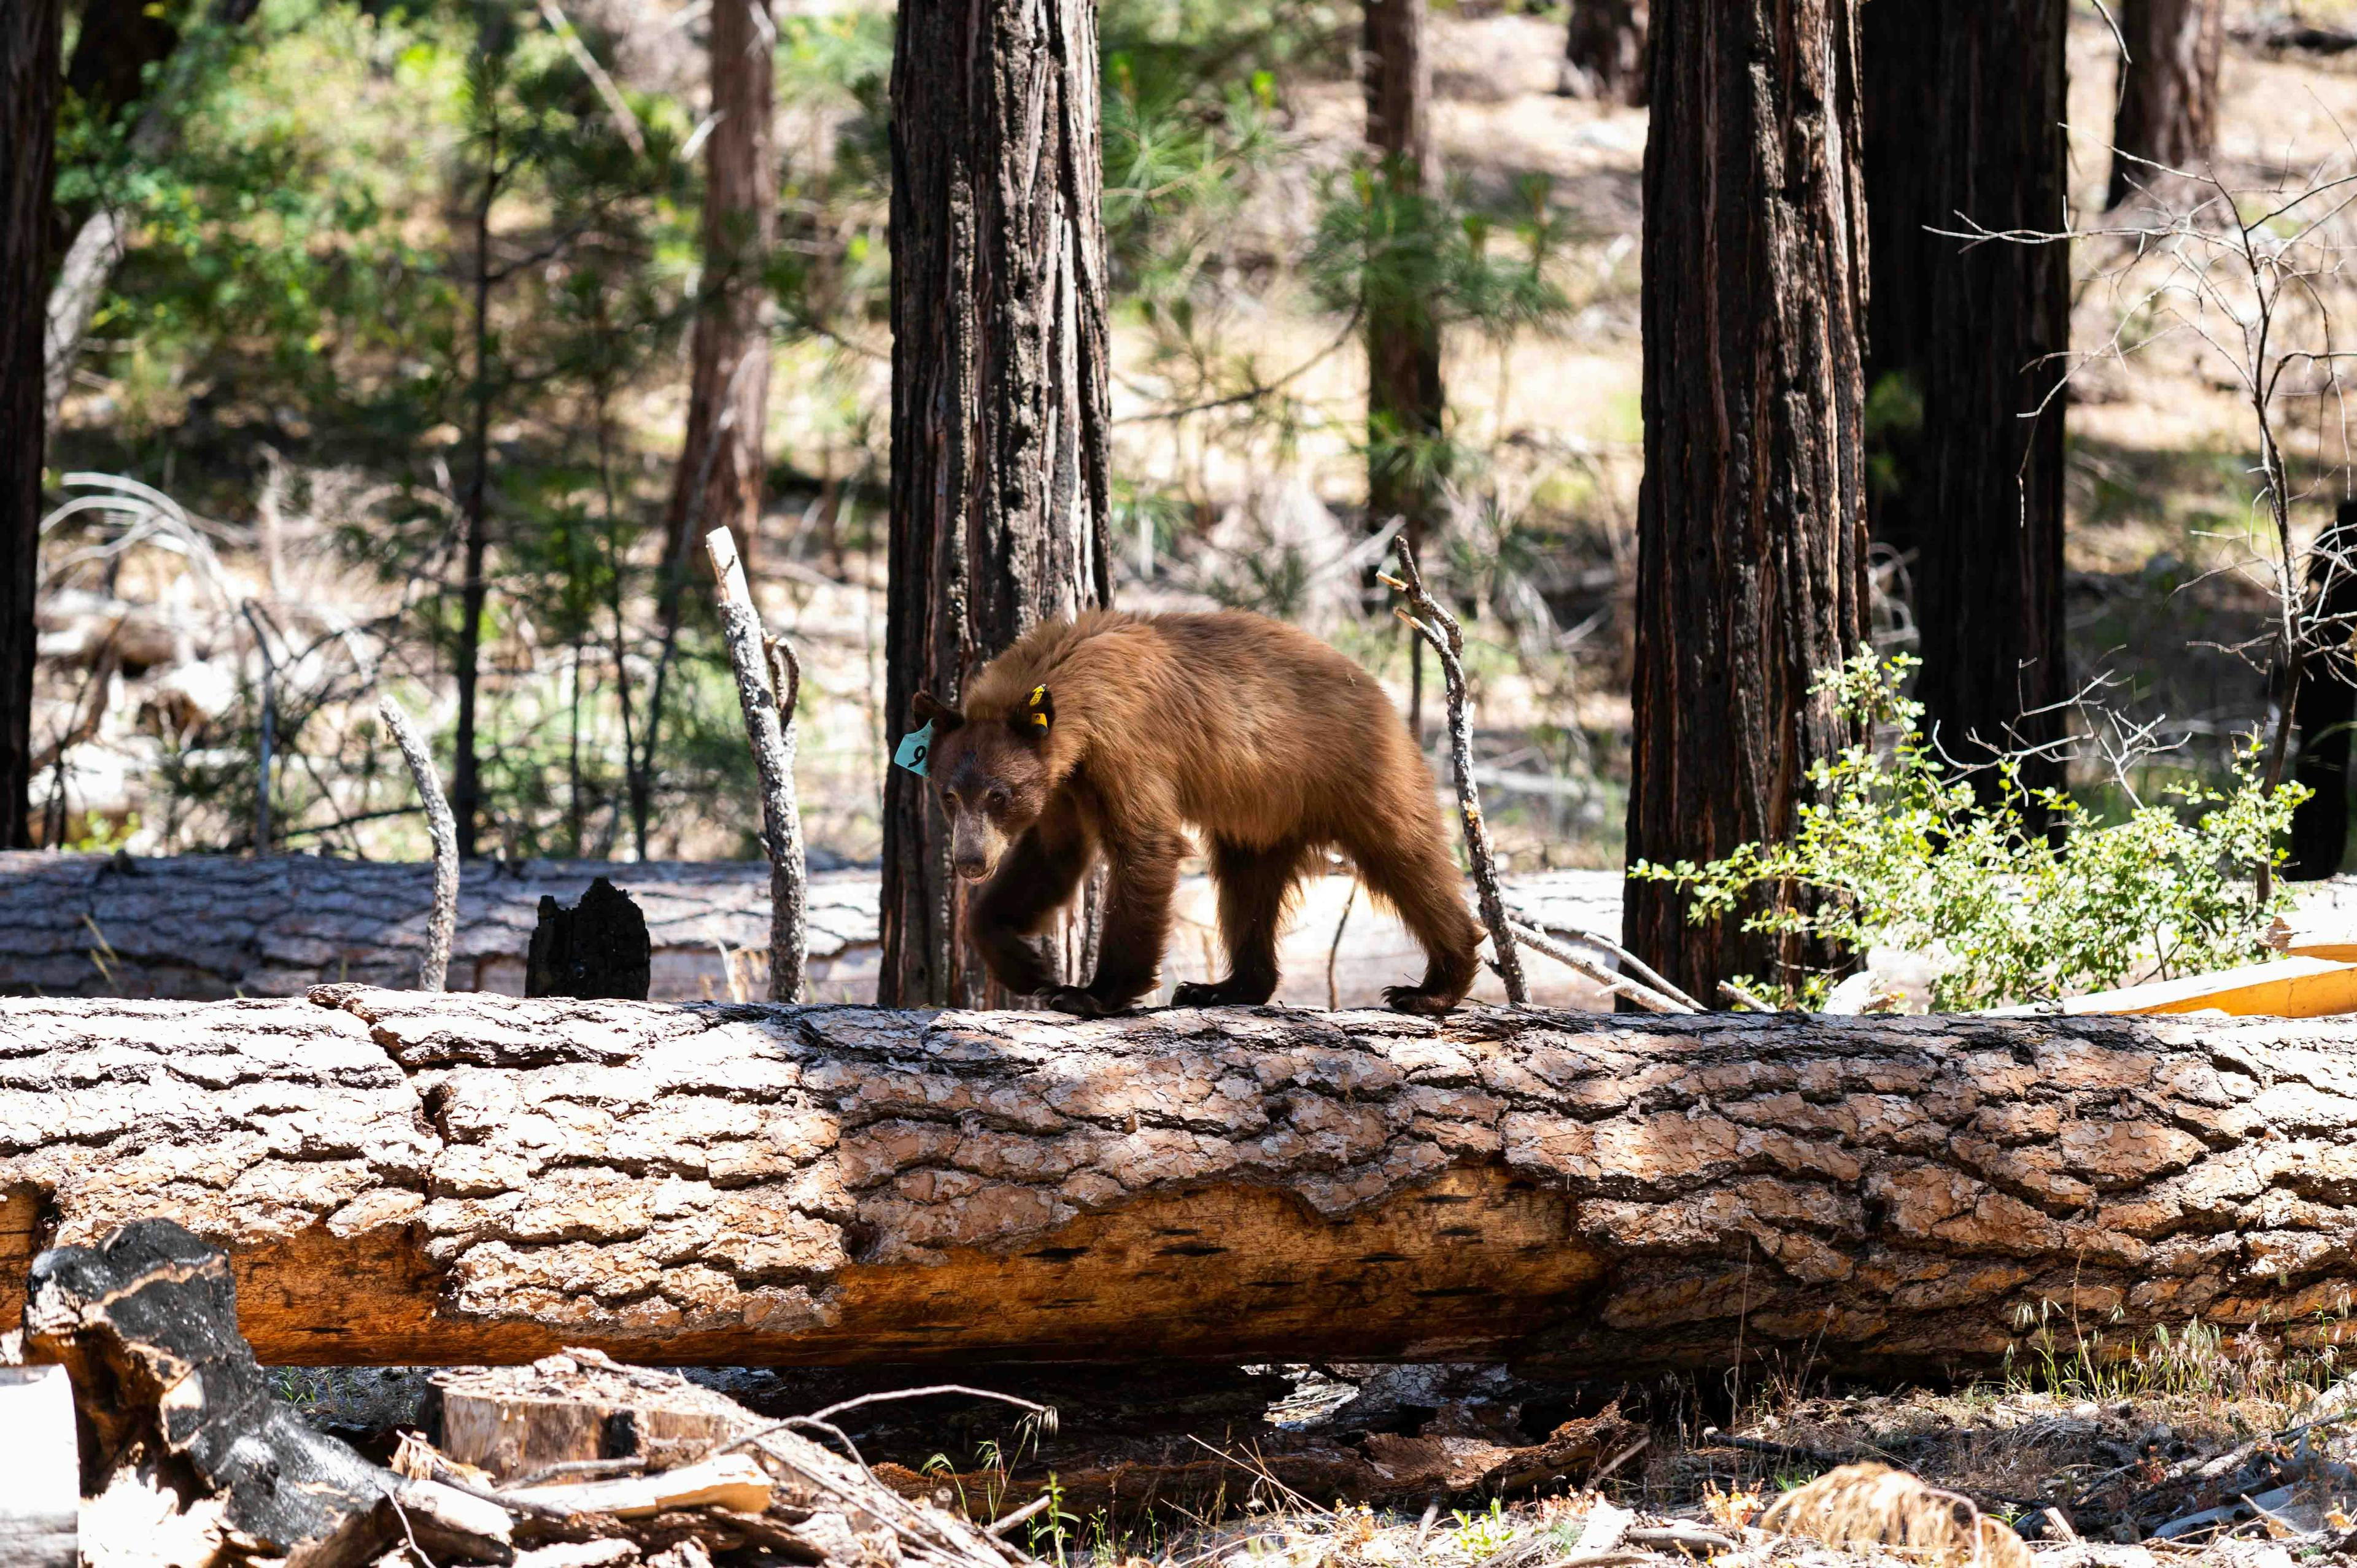 Tagged bear in Yosemite National Park